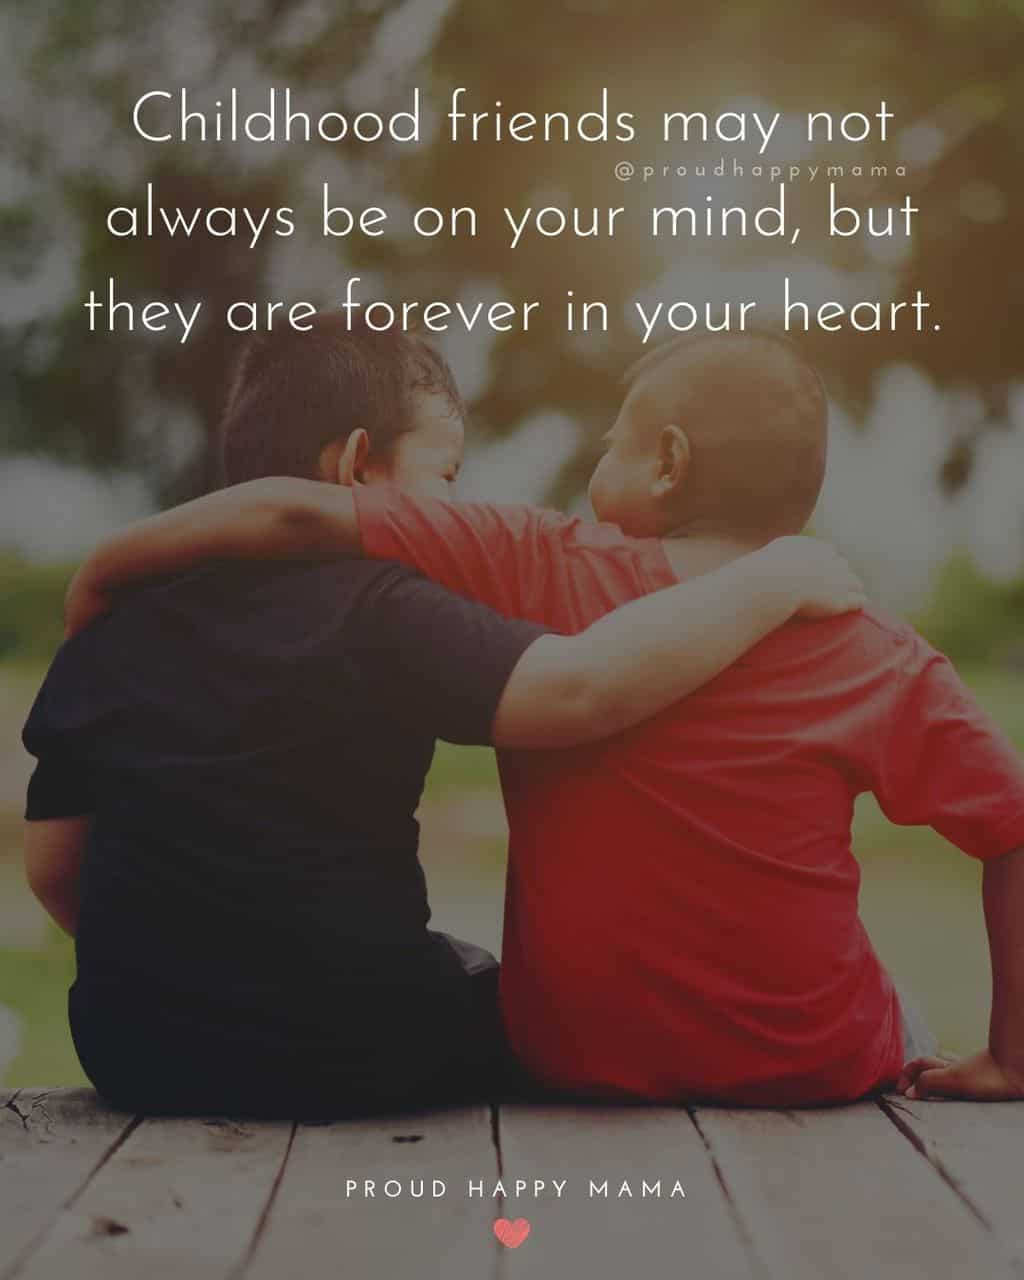 Childhood Friends Quotes - Childhood friends may not always be on your mind, but they are forever in your heart.